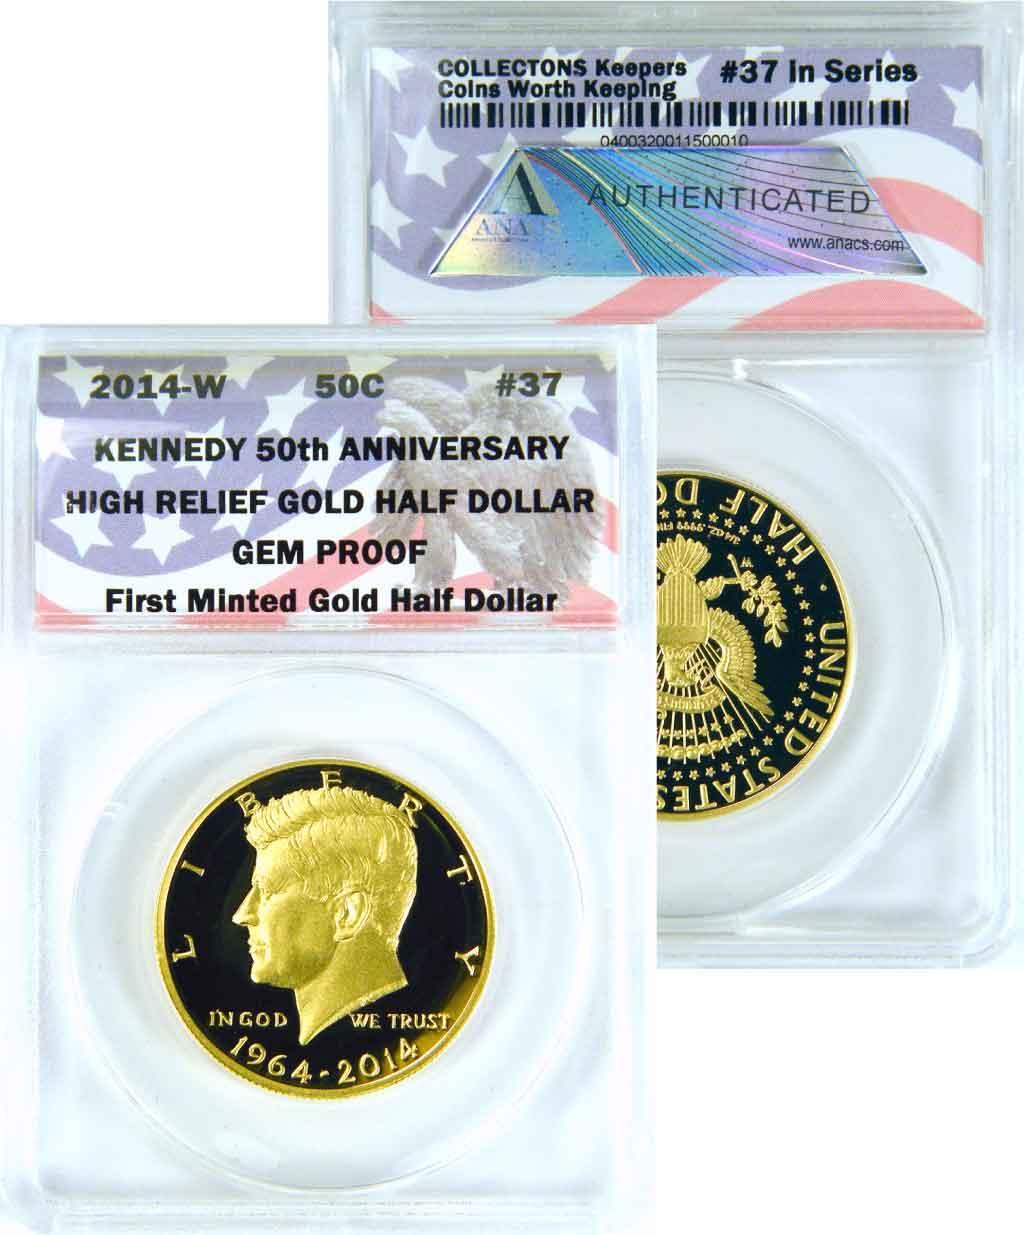 CollecTons Keepers #37: 2014-W Kennedy Half Dollar GOLD Coin Certified in Exclusive ANACS GEM Proof Holder